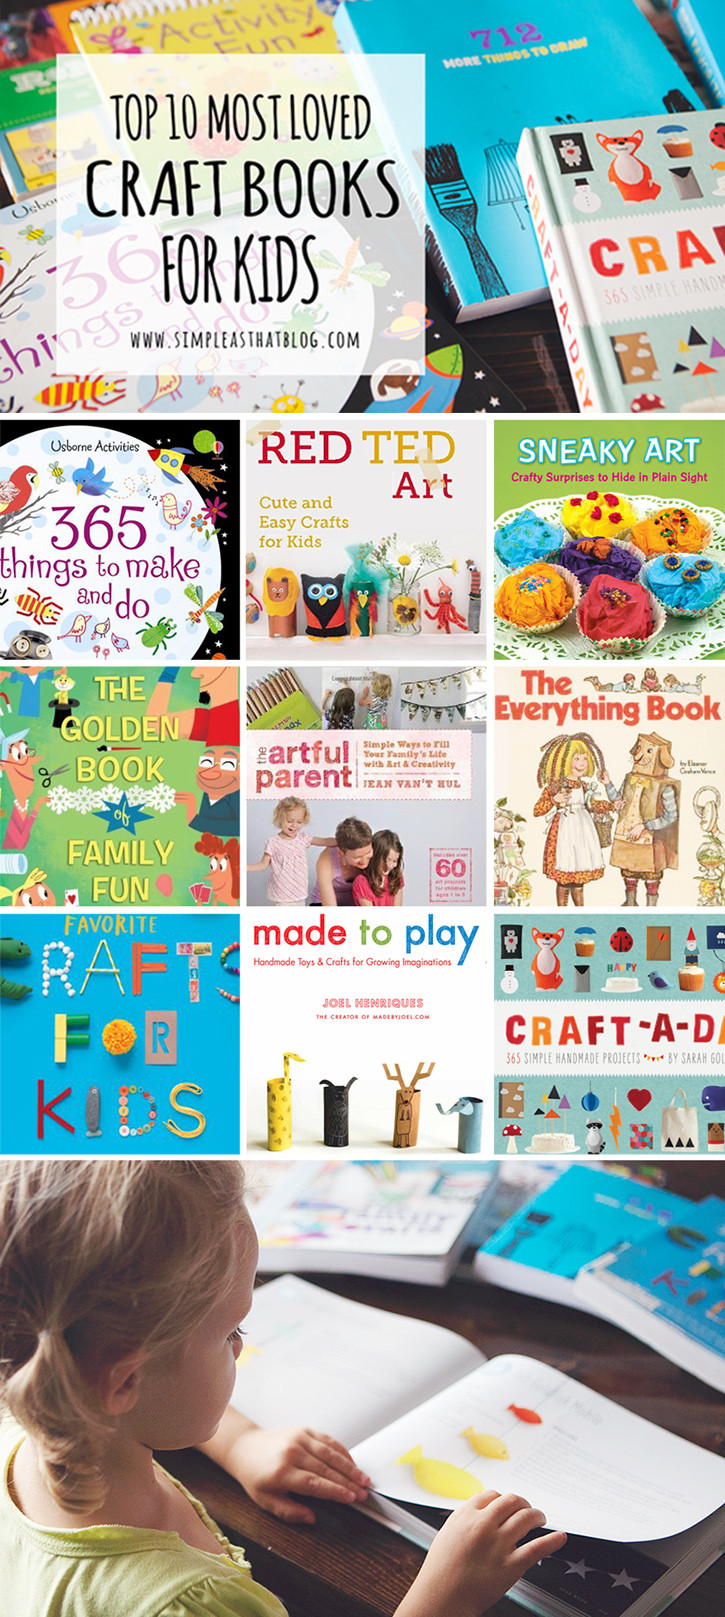 Craft Books For Kids
 Top 10 Most Loved Craft Books for Kids